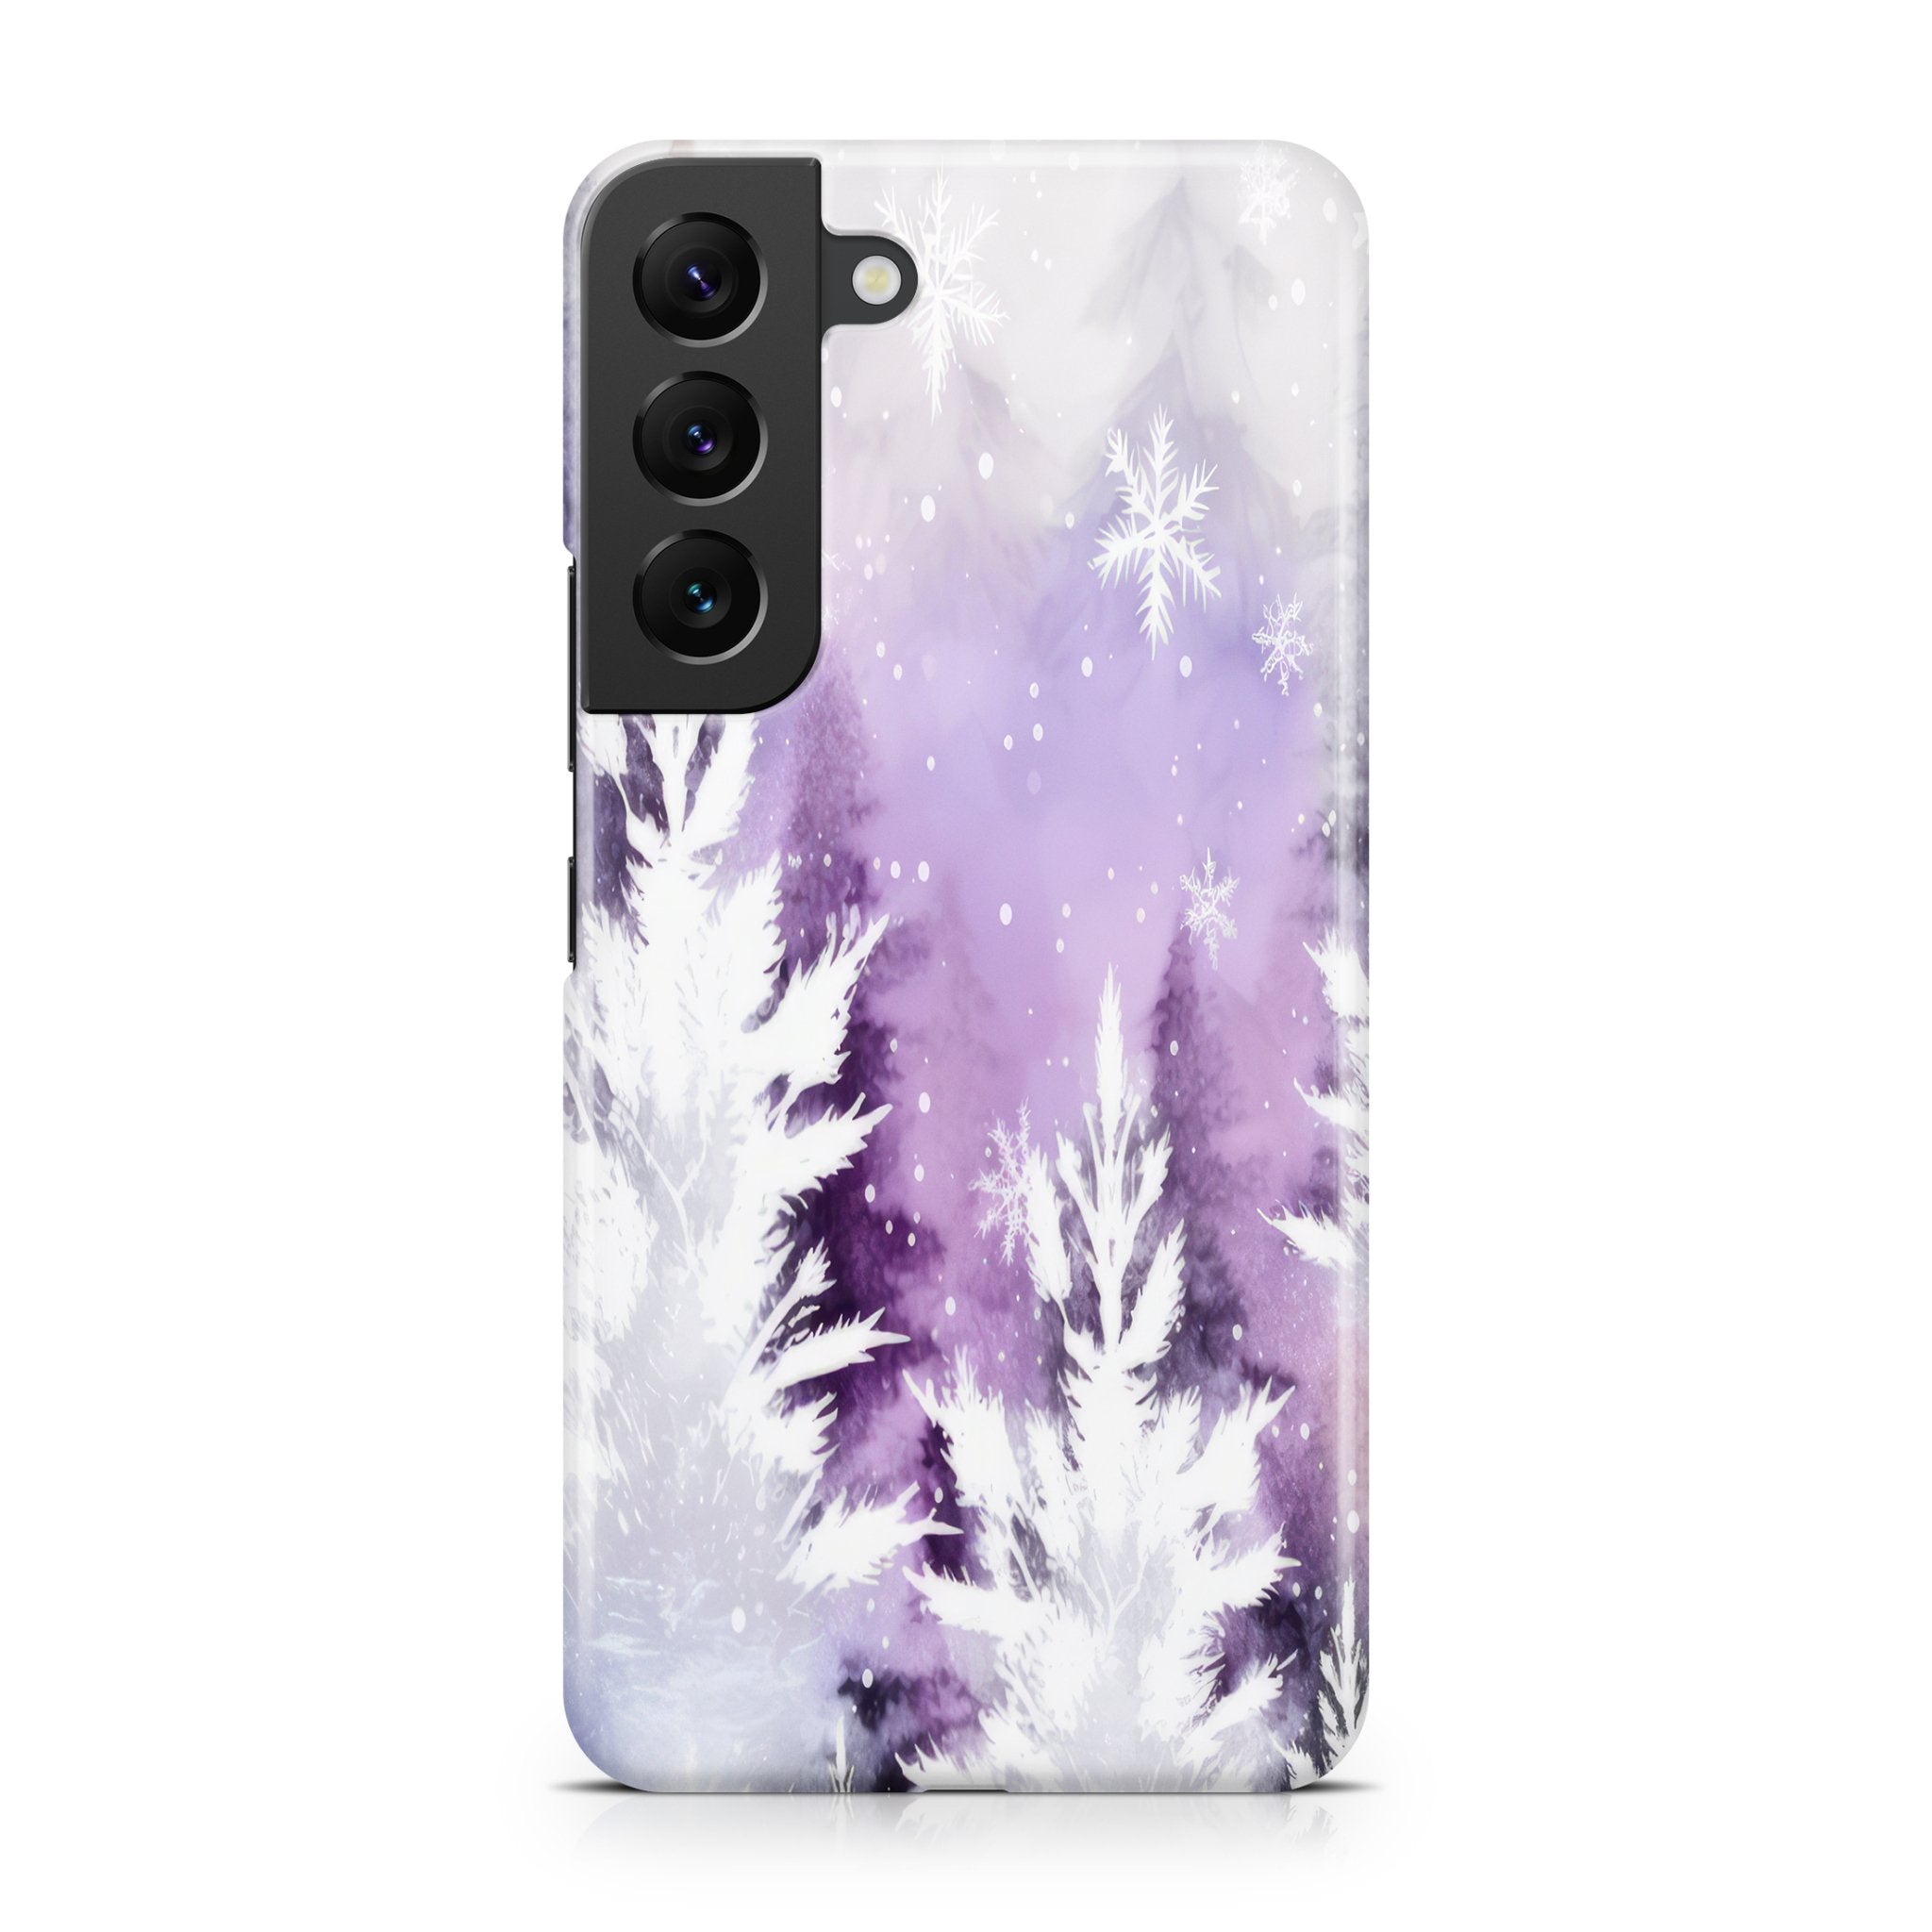 Snowy Forest - Samsung phone case designs by CaseSwagger